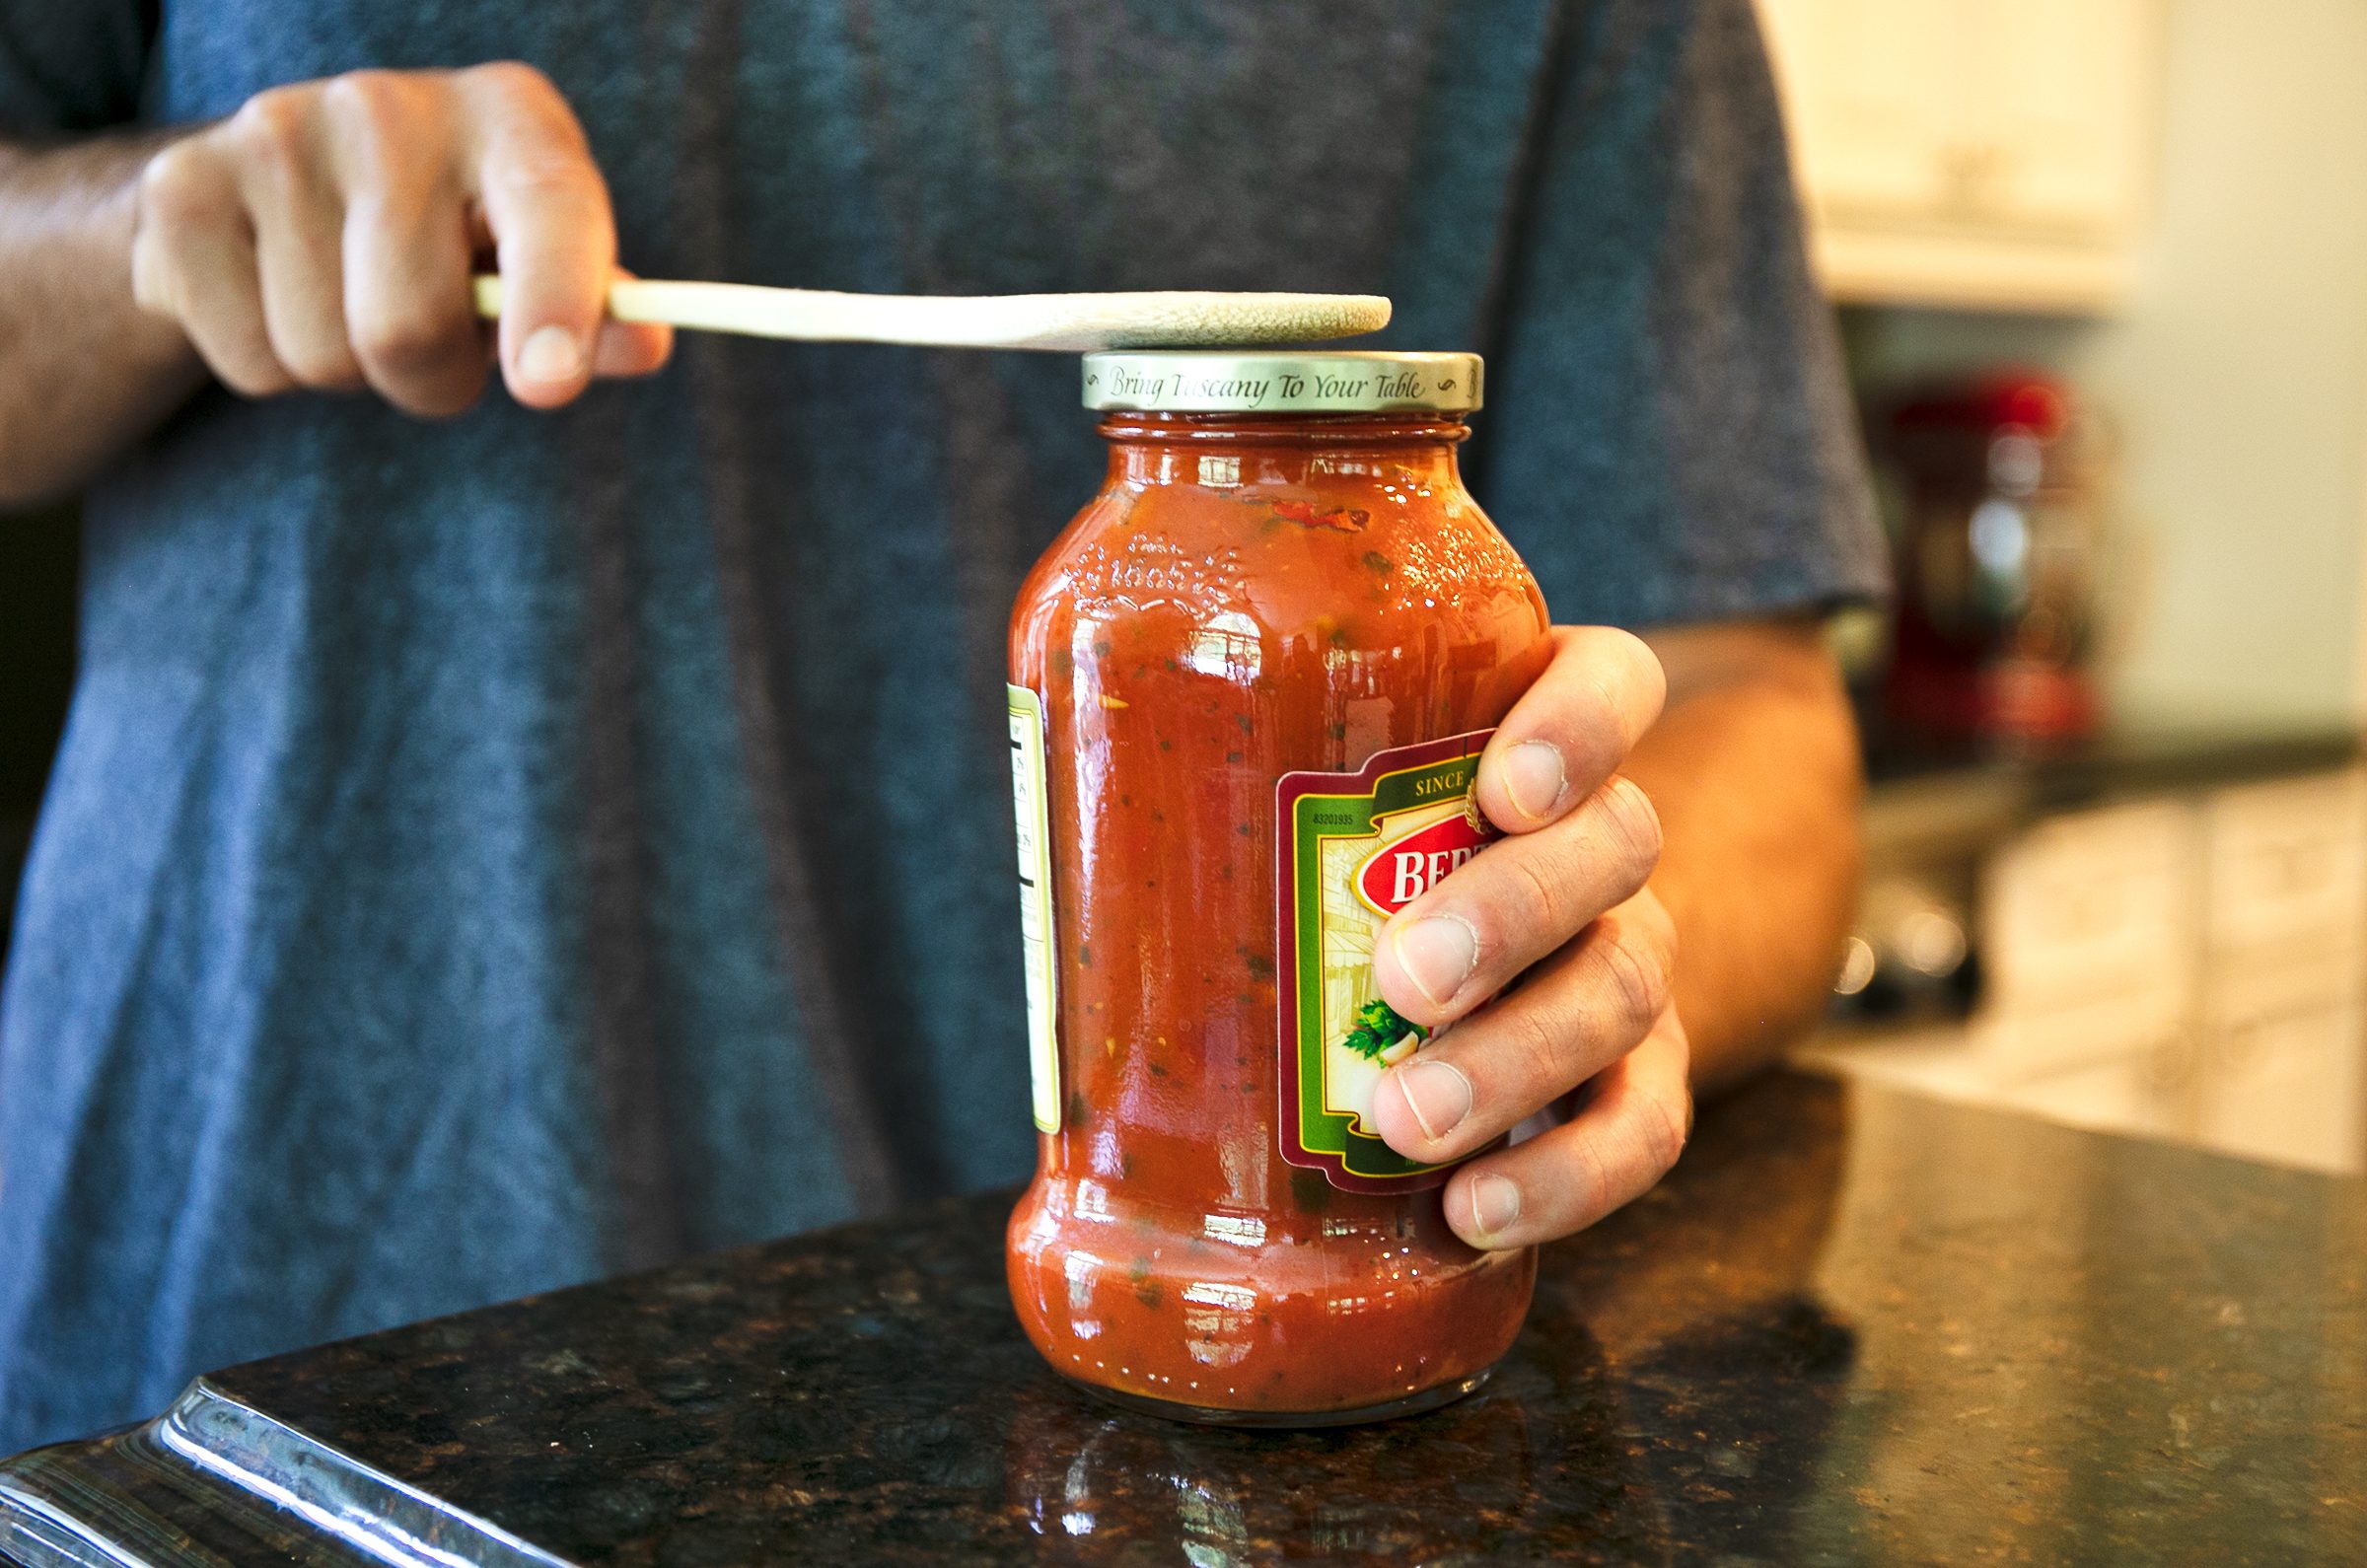 How to Open a Jar: 6 Tricks for Prying Open Even the Most Stubborn